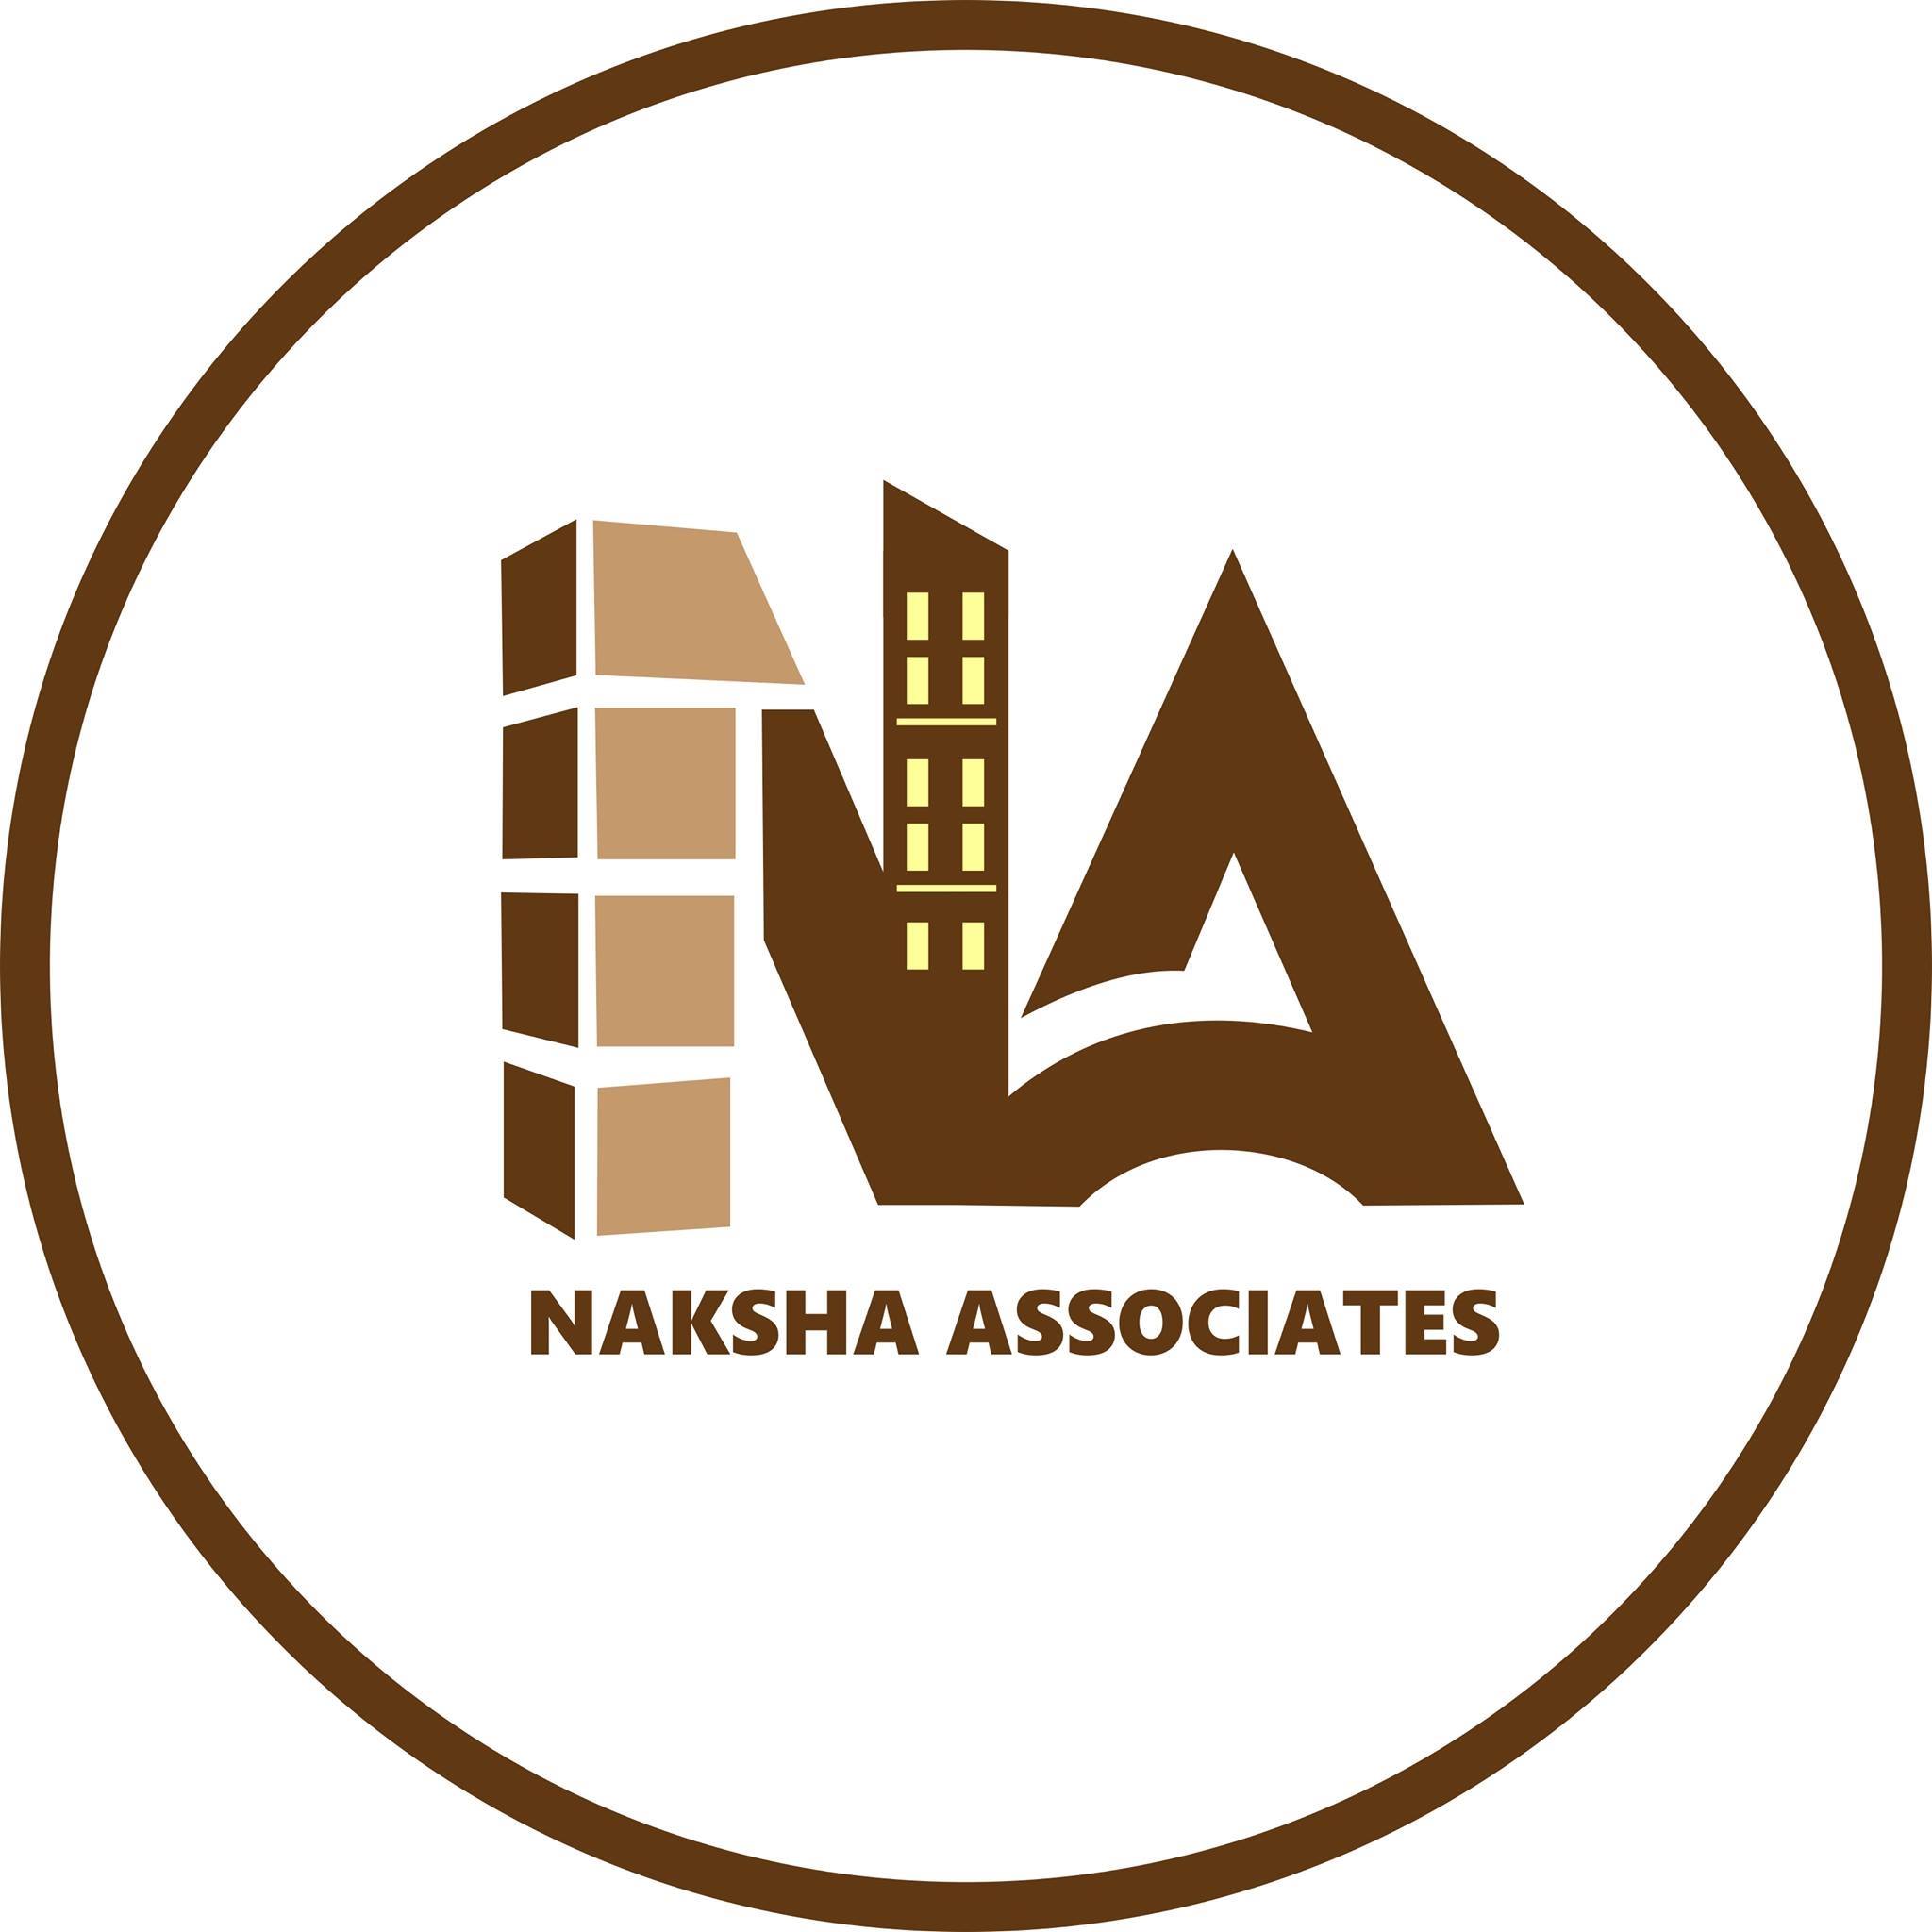 Naksha Associates Civil Engineer And Structural Consultants|Legal Services|Professional Services